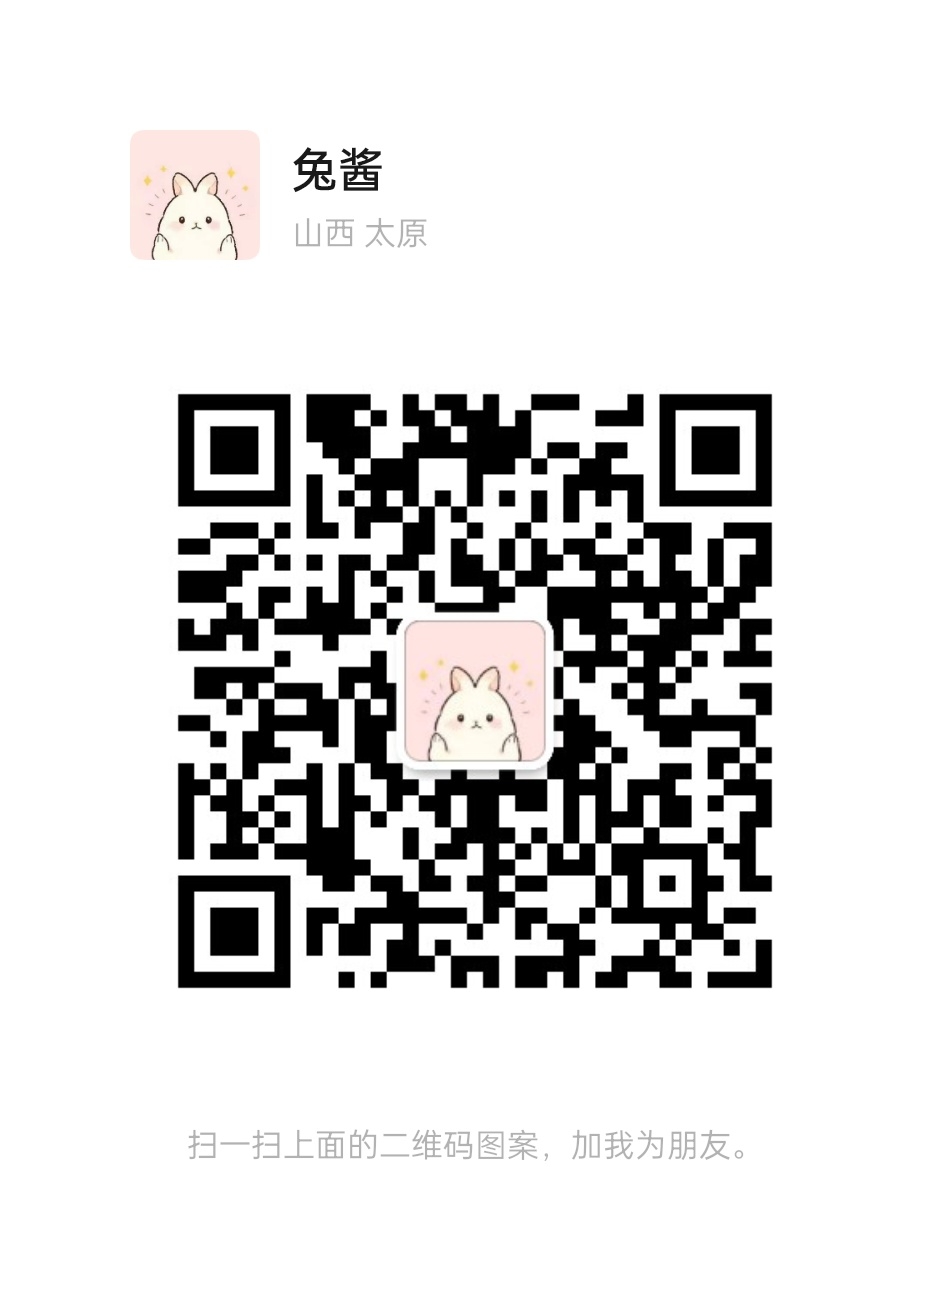 mmqrcode1710258129661.png